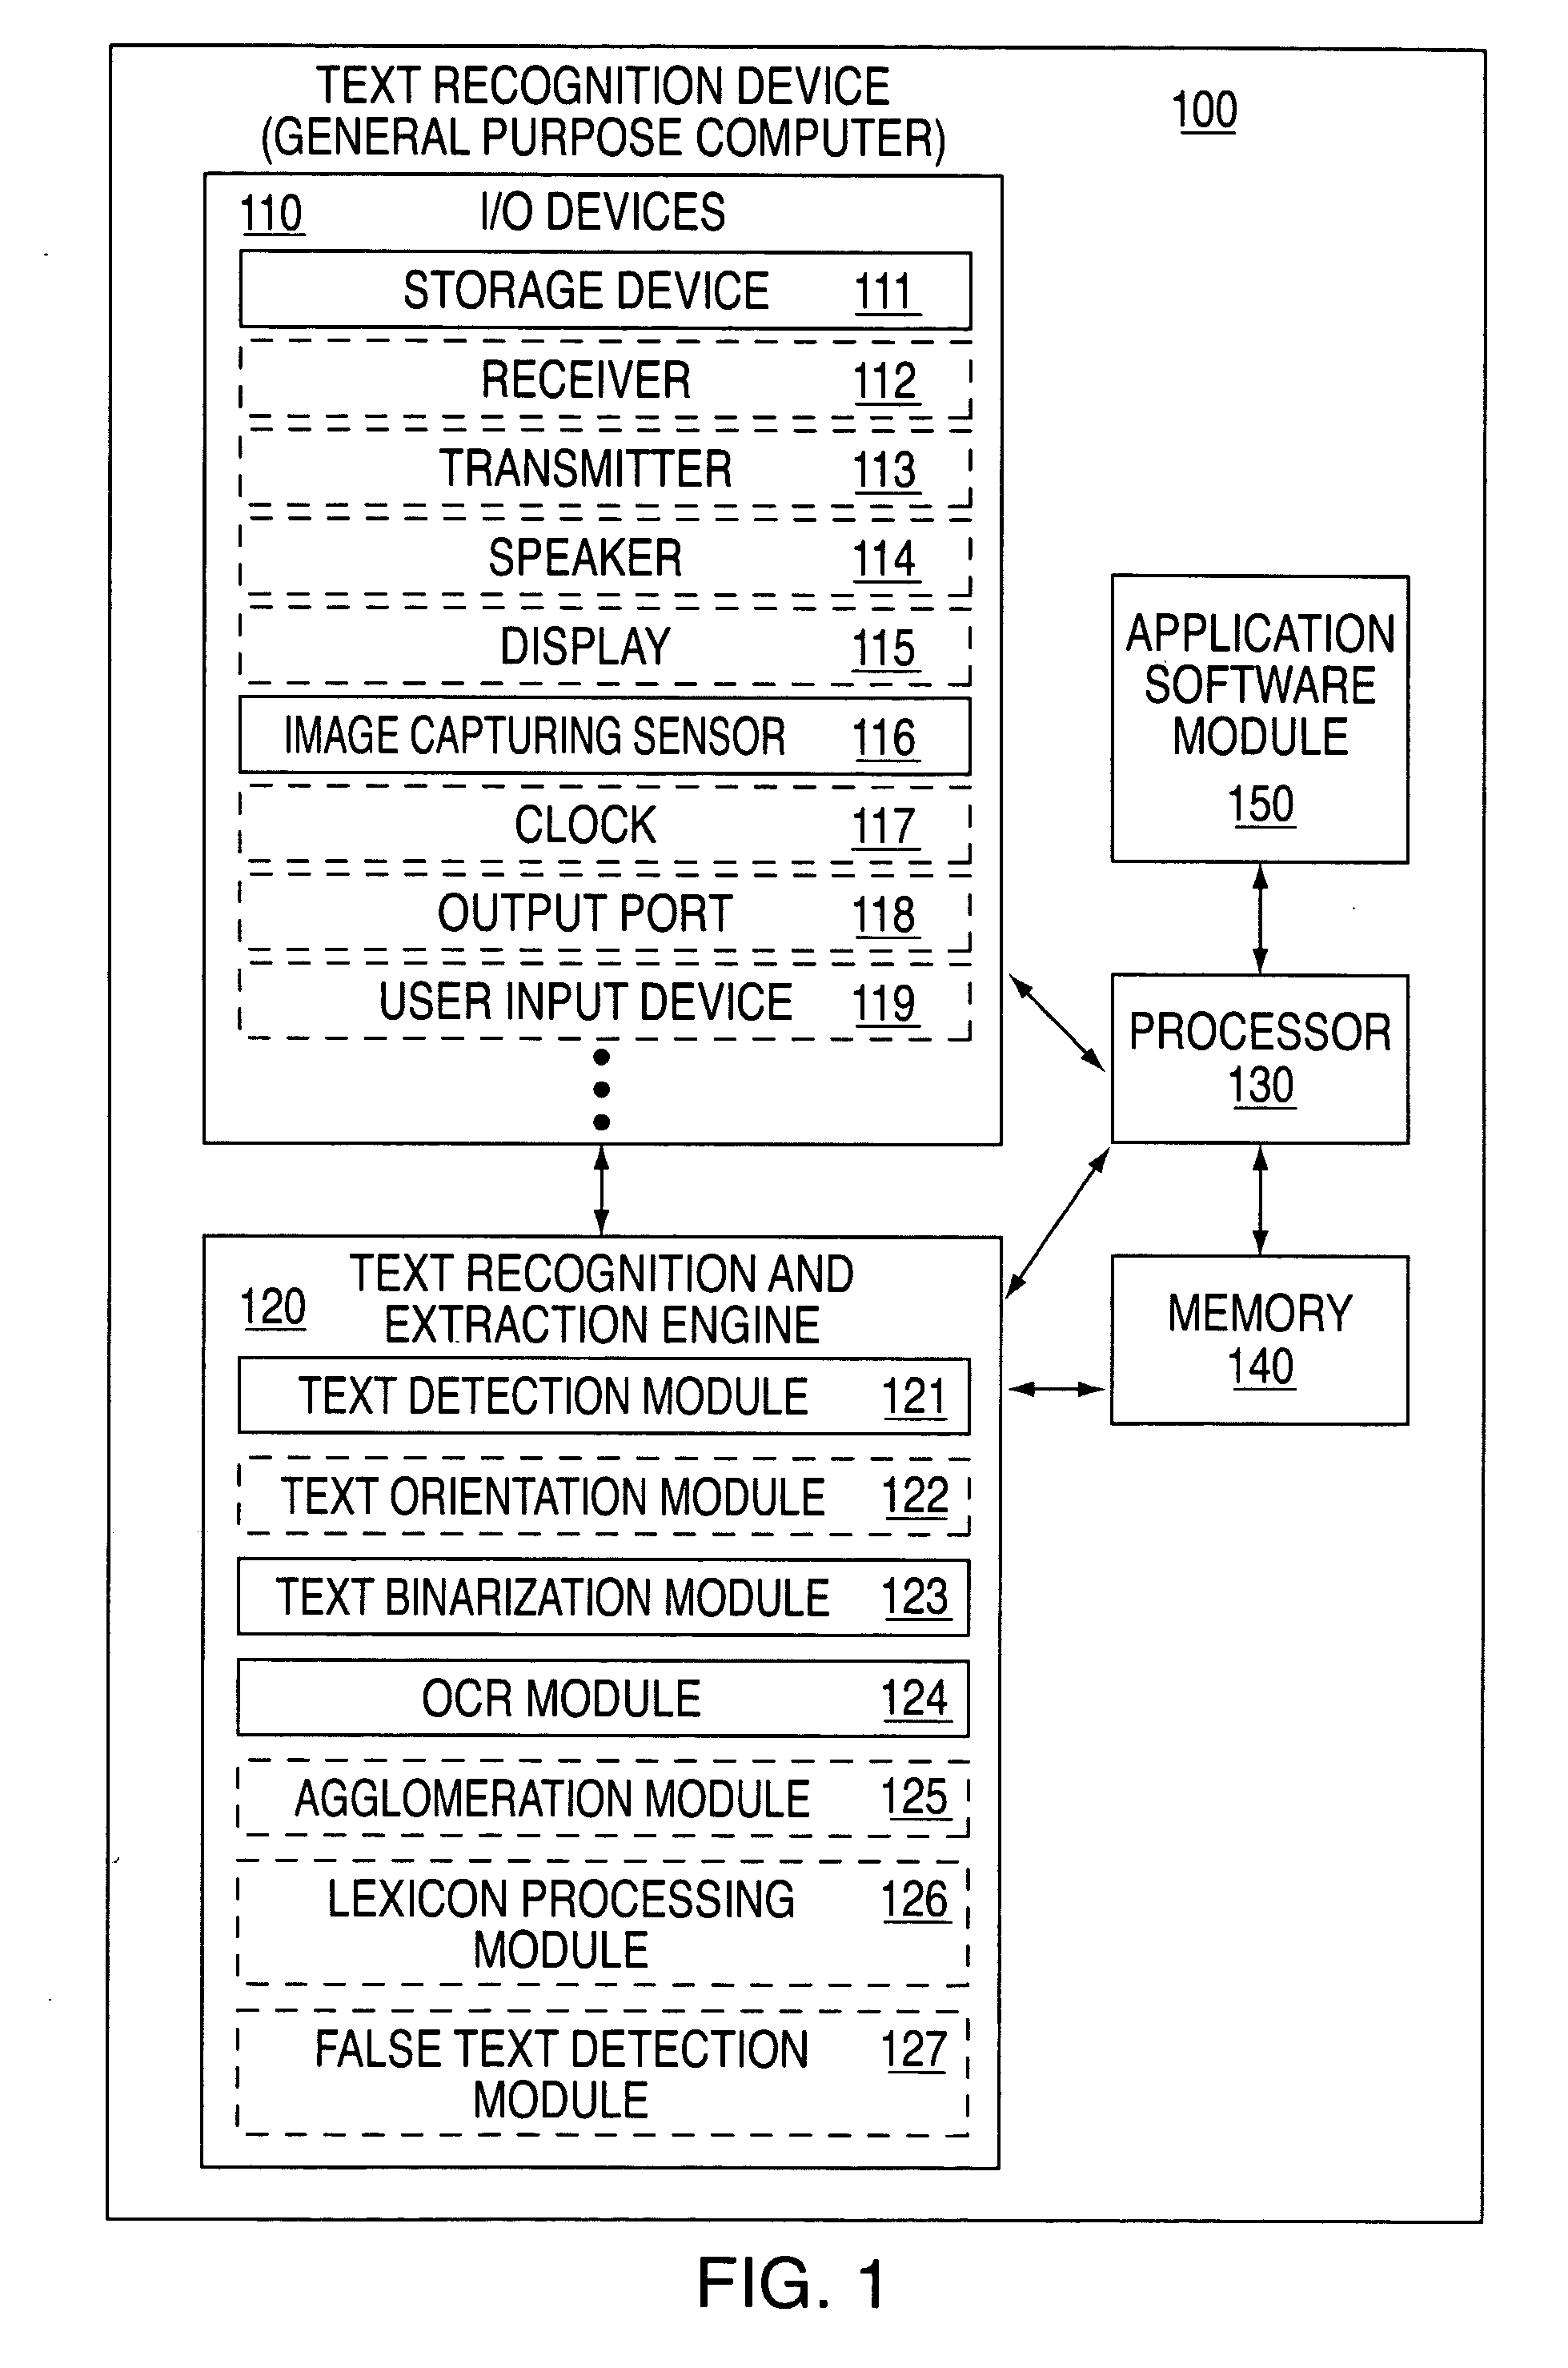 Method and apparatus for portably recognizing text in an image sequence of scene imagery